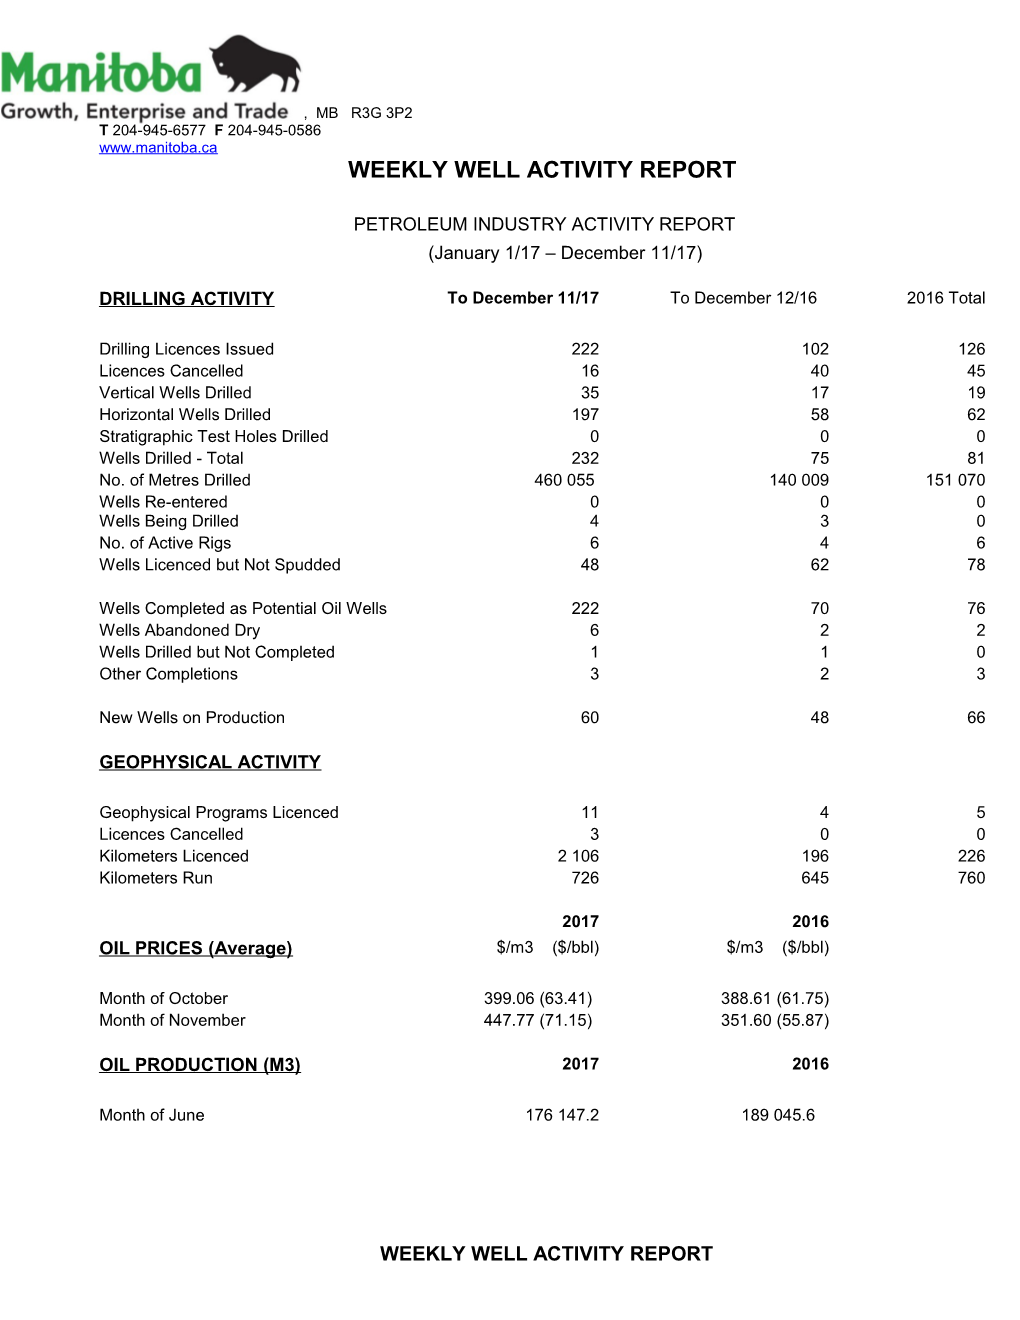 Weekly Well Activity Report s3